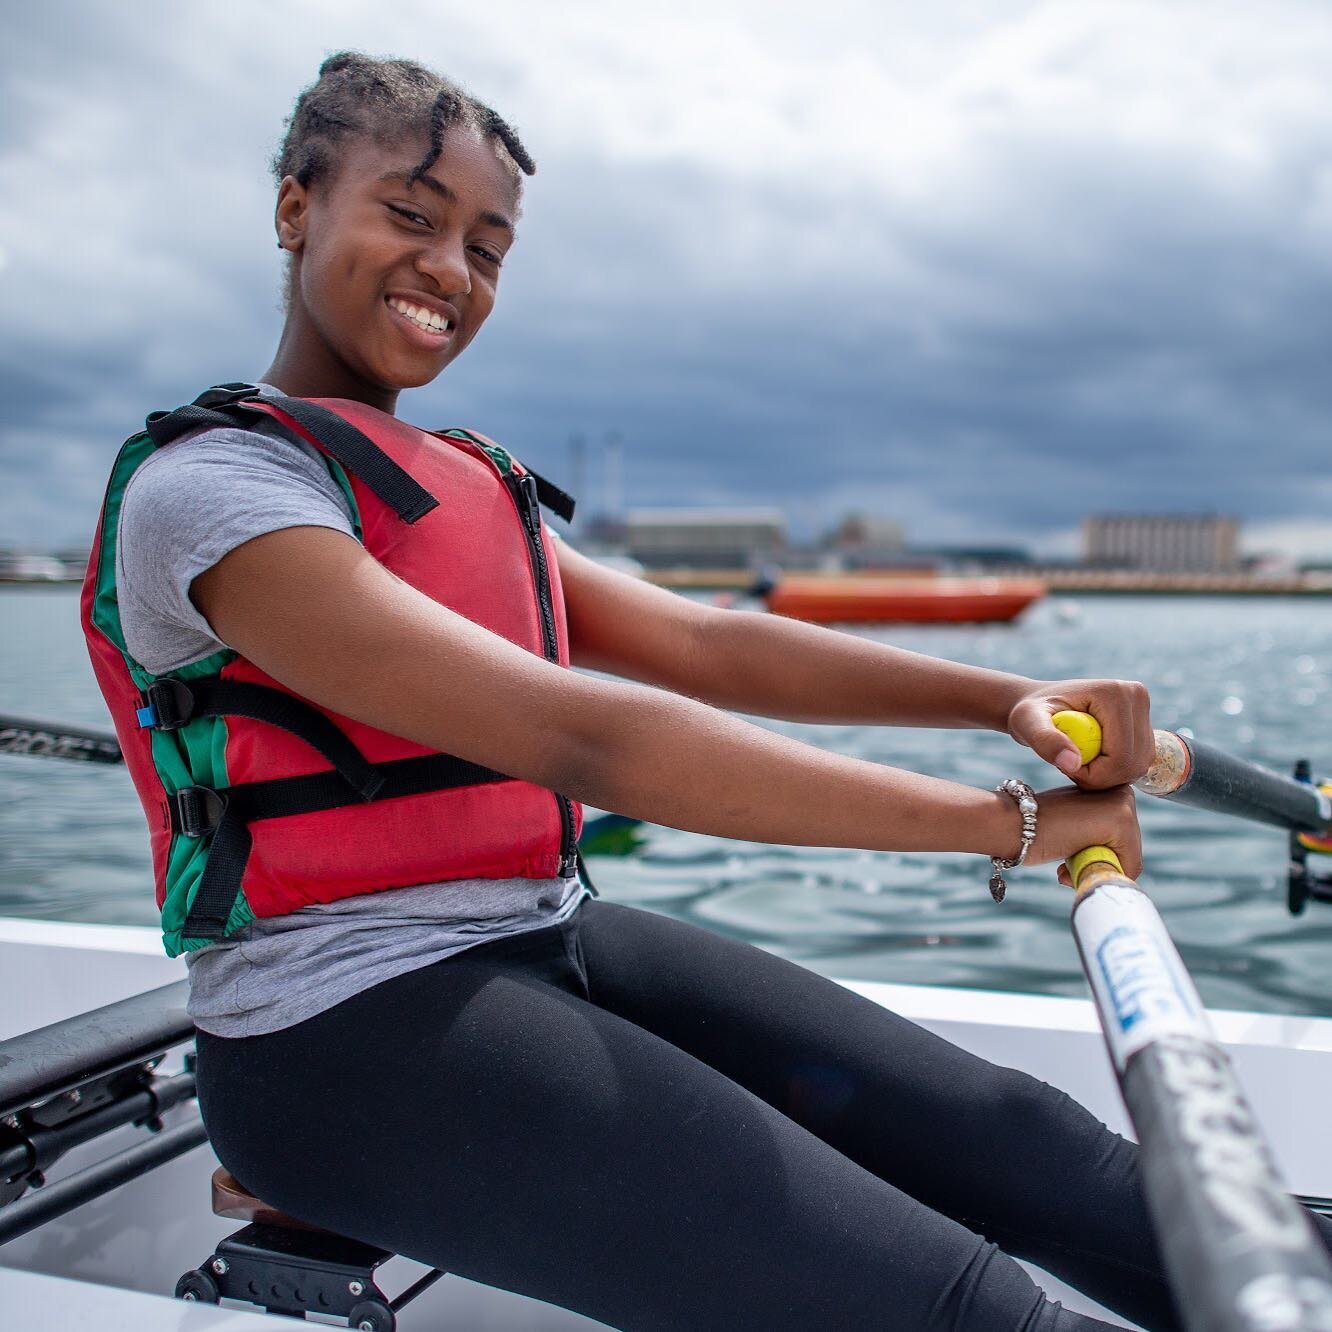 The skills learned by our participants  during our weekly indoors sessions are then transferred to on-water rowing. The midterm sessions are delivered by @londonyouthrowing and are funded by amazing partners such as the @theboatraces 

📸 @theboatrac